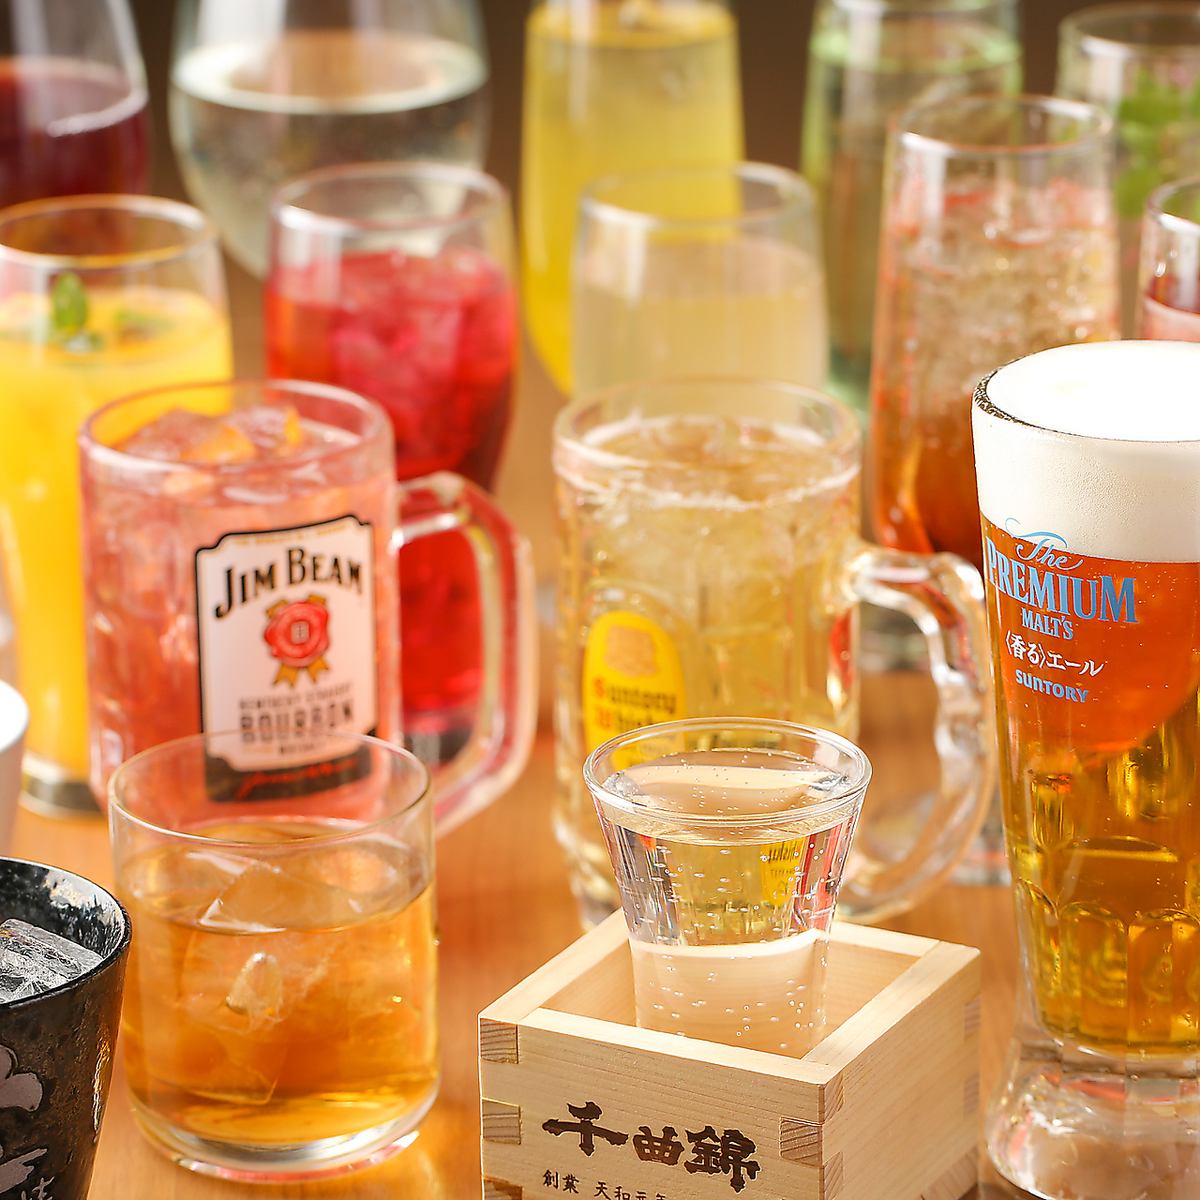 All-you-can-drink for 2 hours with 250 varieties for 1,500 yen!